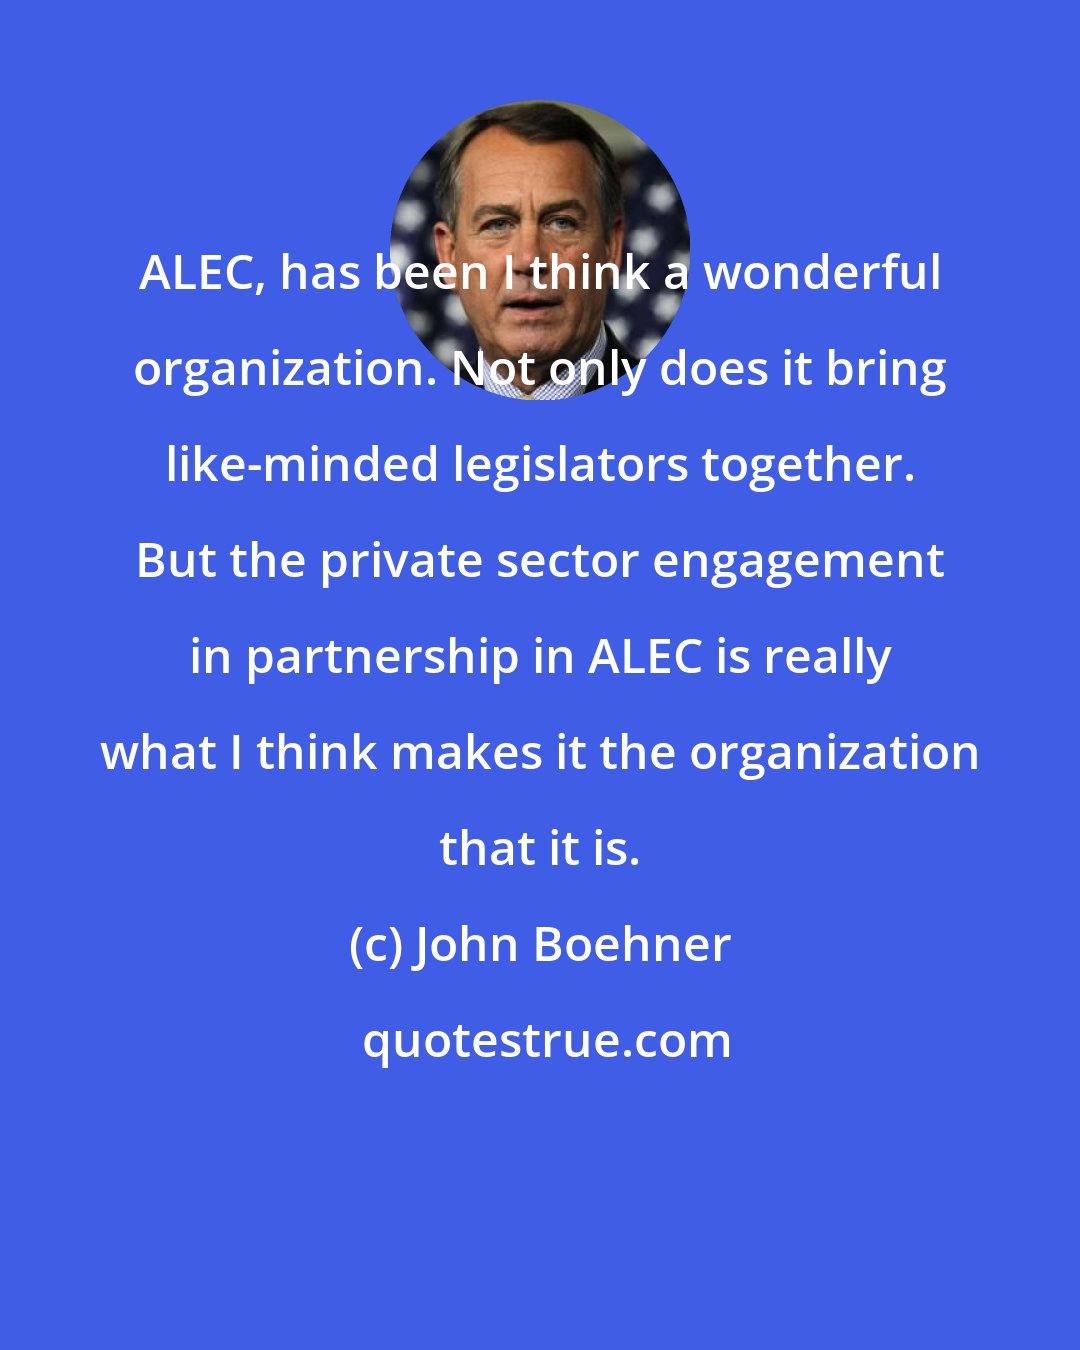 John Boehner: ALEC, has been I think a wonderful organization. Not only does it bring like-minded legislators together. But the private sector engagement in partnership in ALEC is really what I think makes it the organization that it is.